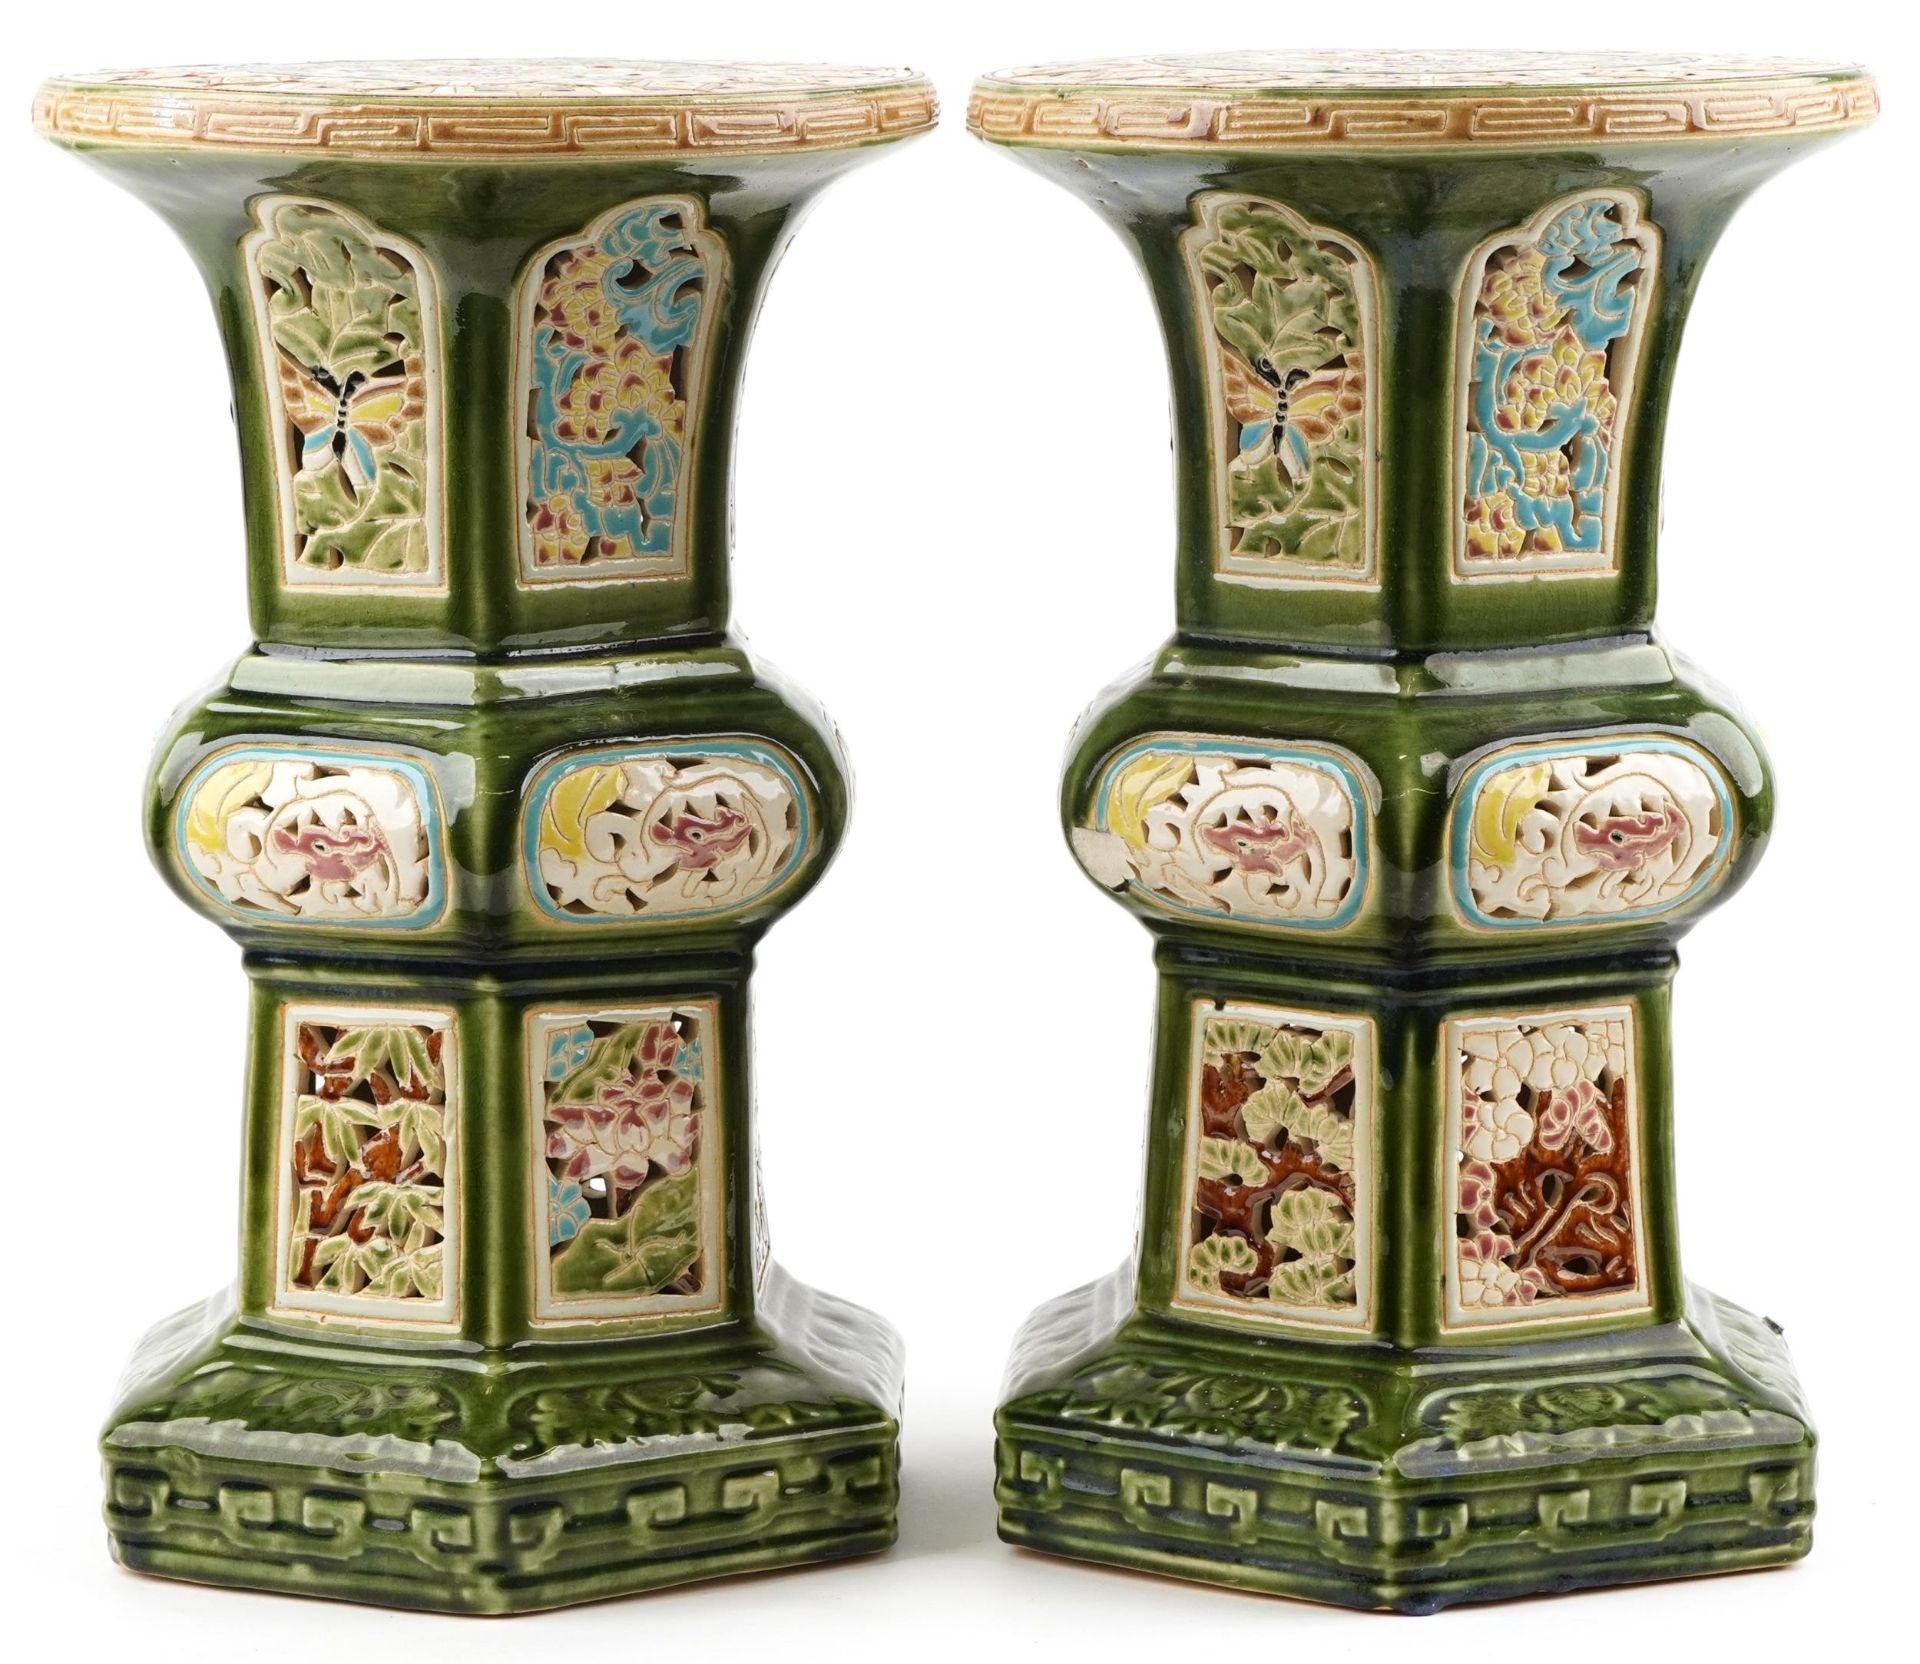 Pair of Chinese pierced porcelain archaic style garden seats each hand painted with flowers having - Image 4 of 7